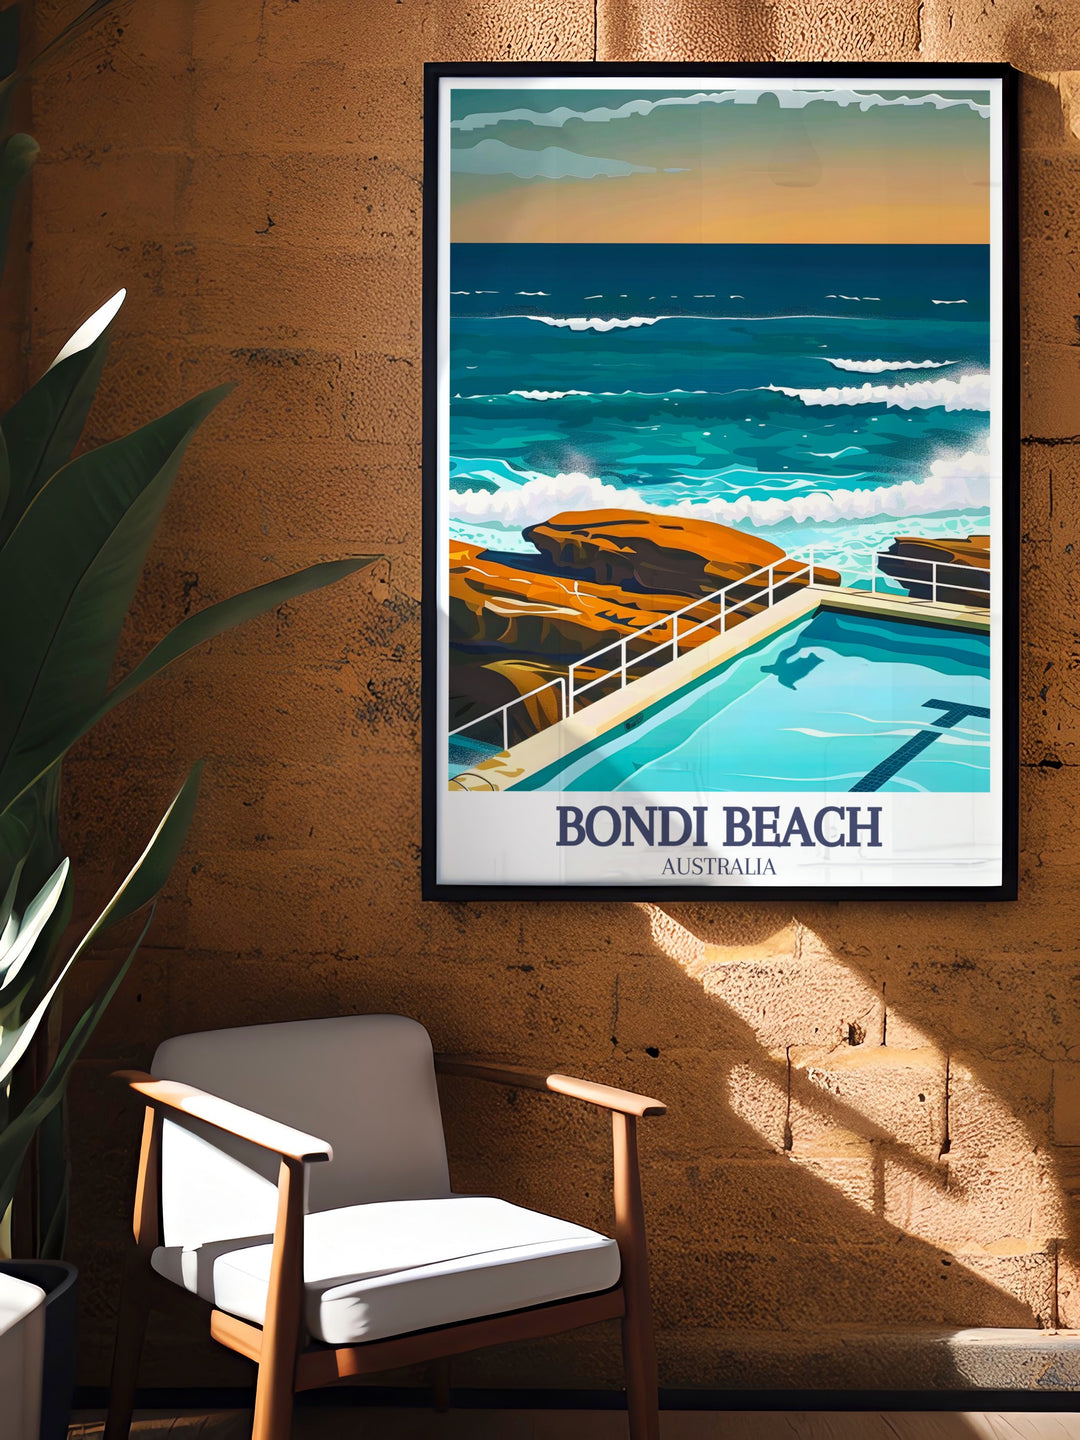 Framed print of Sydney Harbour highlighting the architectural marvels of the Sydney Opera House and Harbour Bridge. Bondi Icebergs pool Bondi digital print bringing the beach charm to your home decor. A must have for fans of vintage travel prints and Australia art.